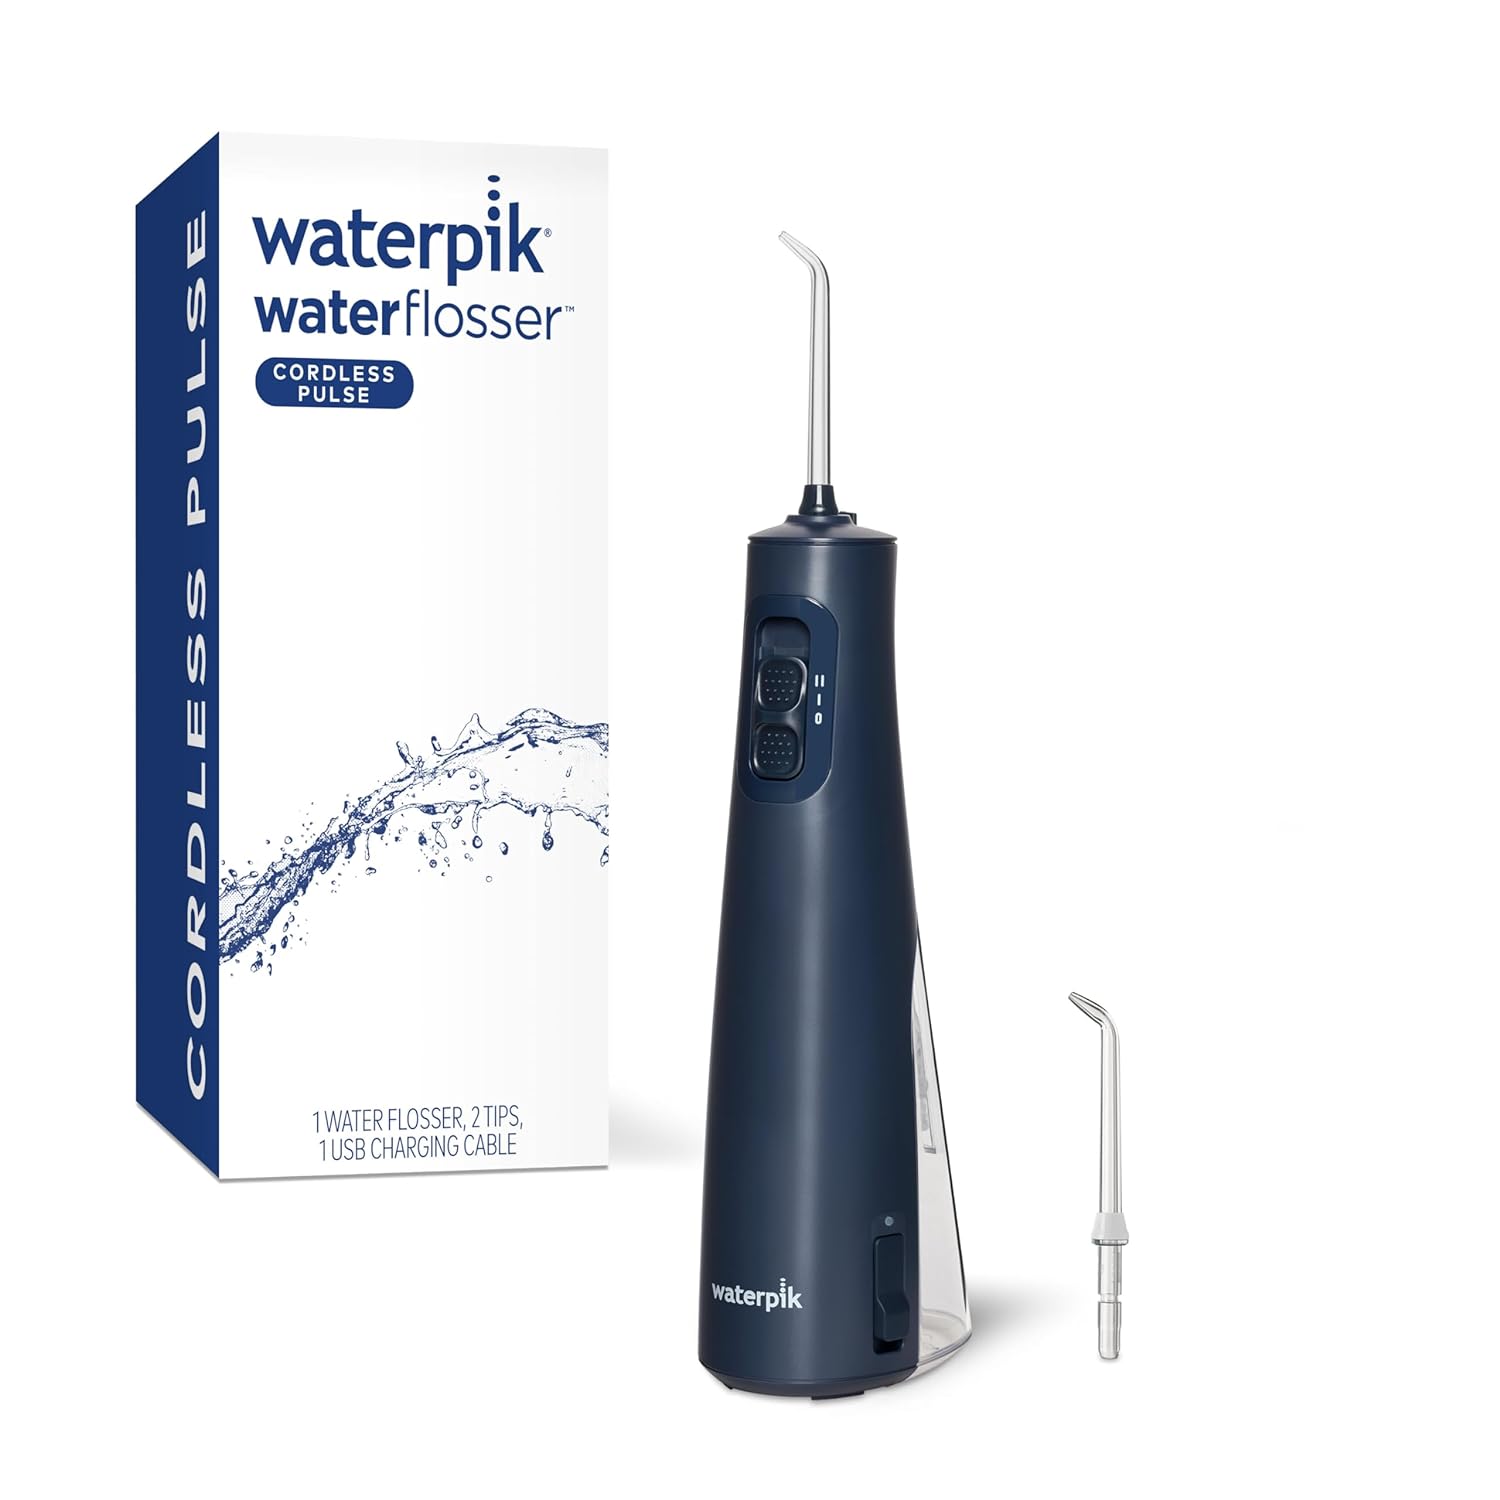 Waterpik Cordless Pulse Rechargeable Portable Water Flosser for Teeth